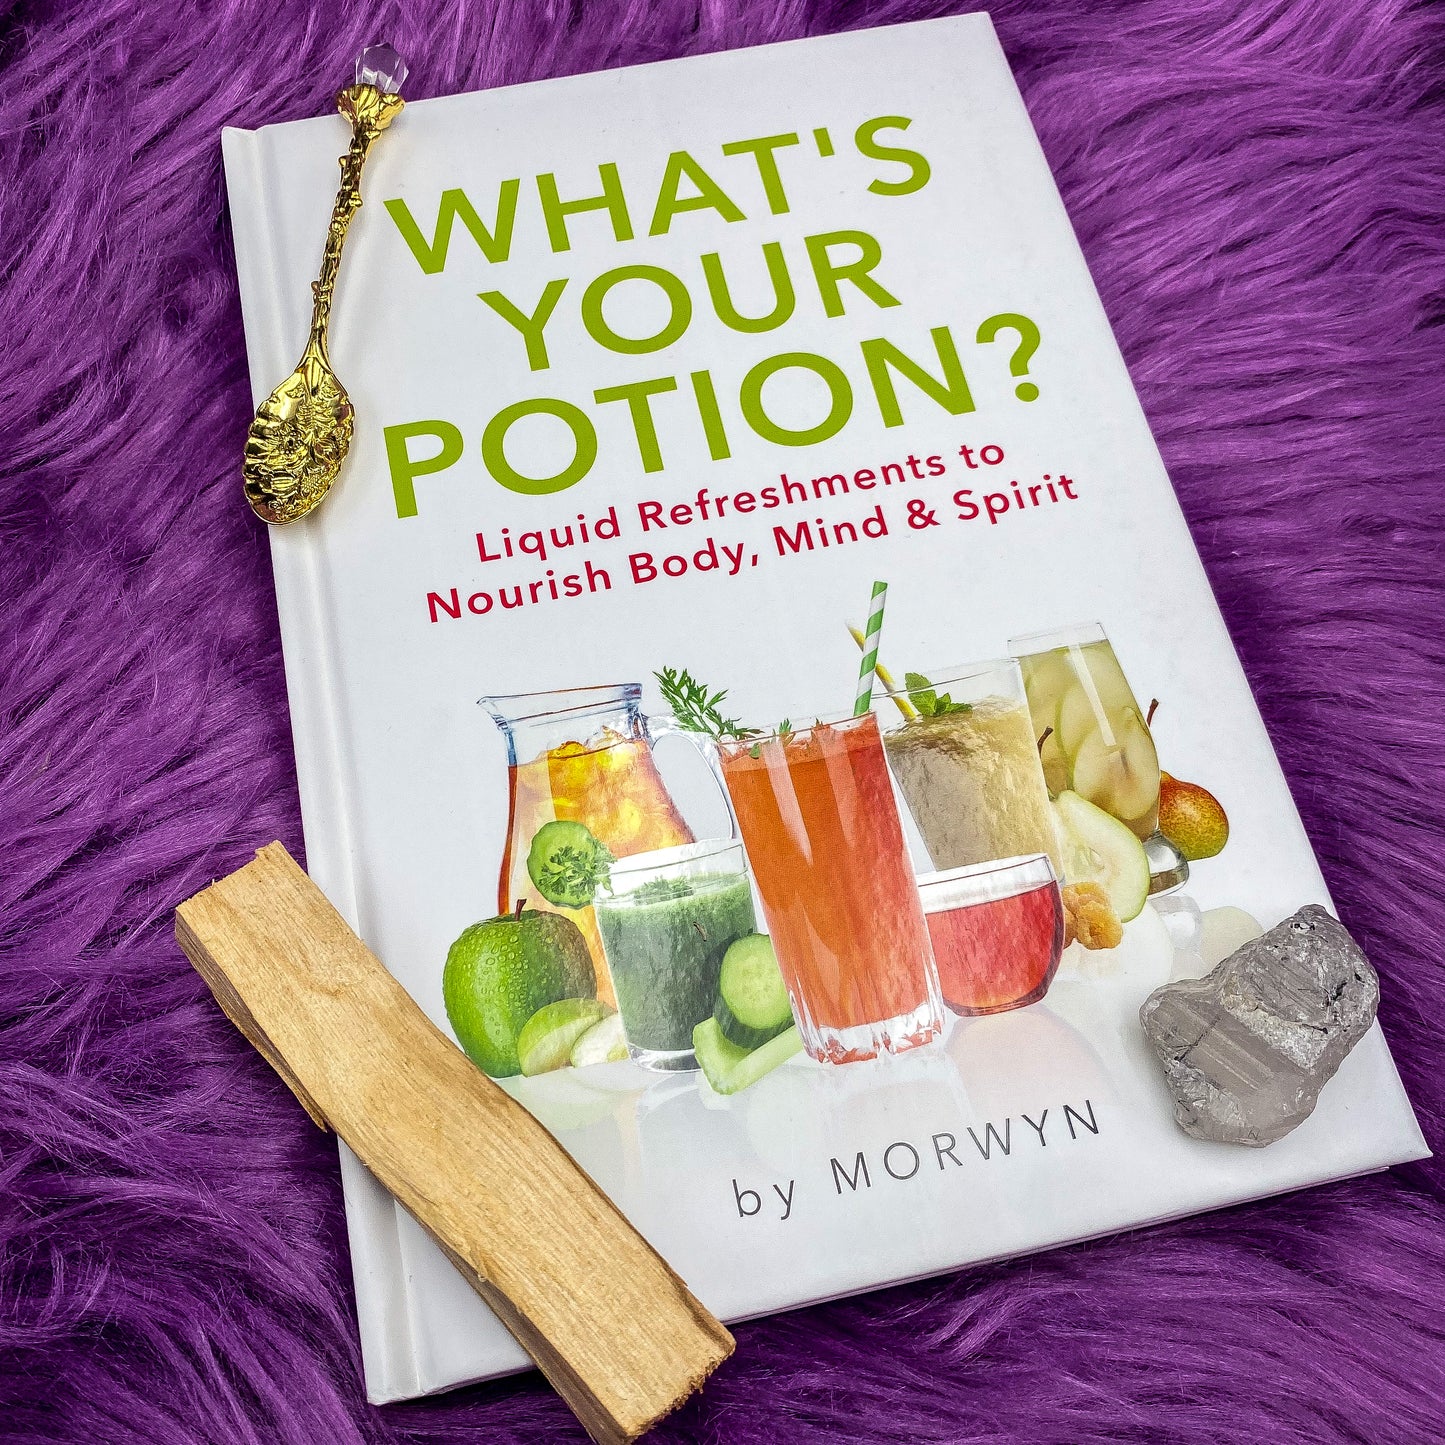 What's Your Potion?: Liquid Refreshments to Nourish Body, Mind, and Spirit by Morwyn